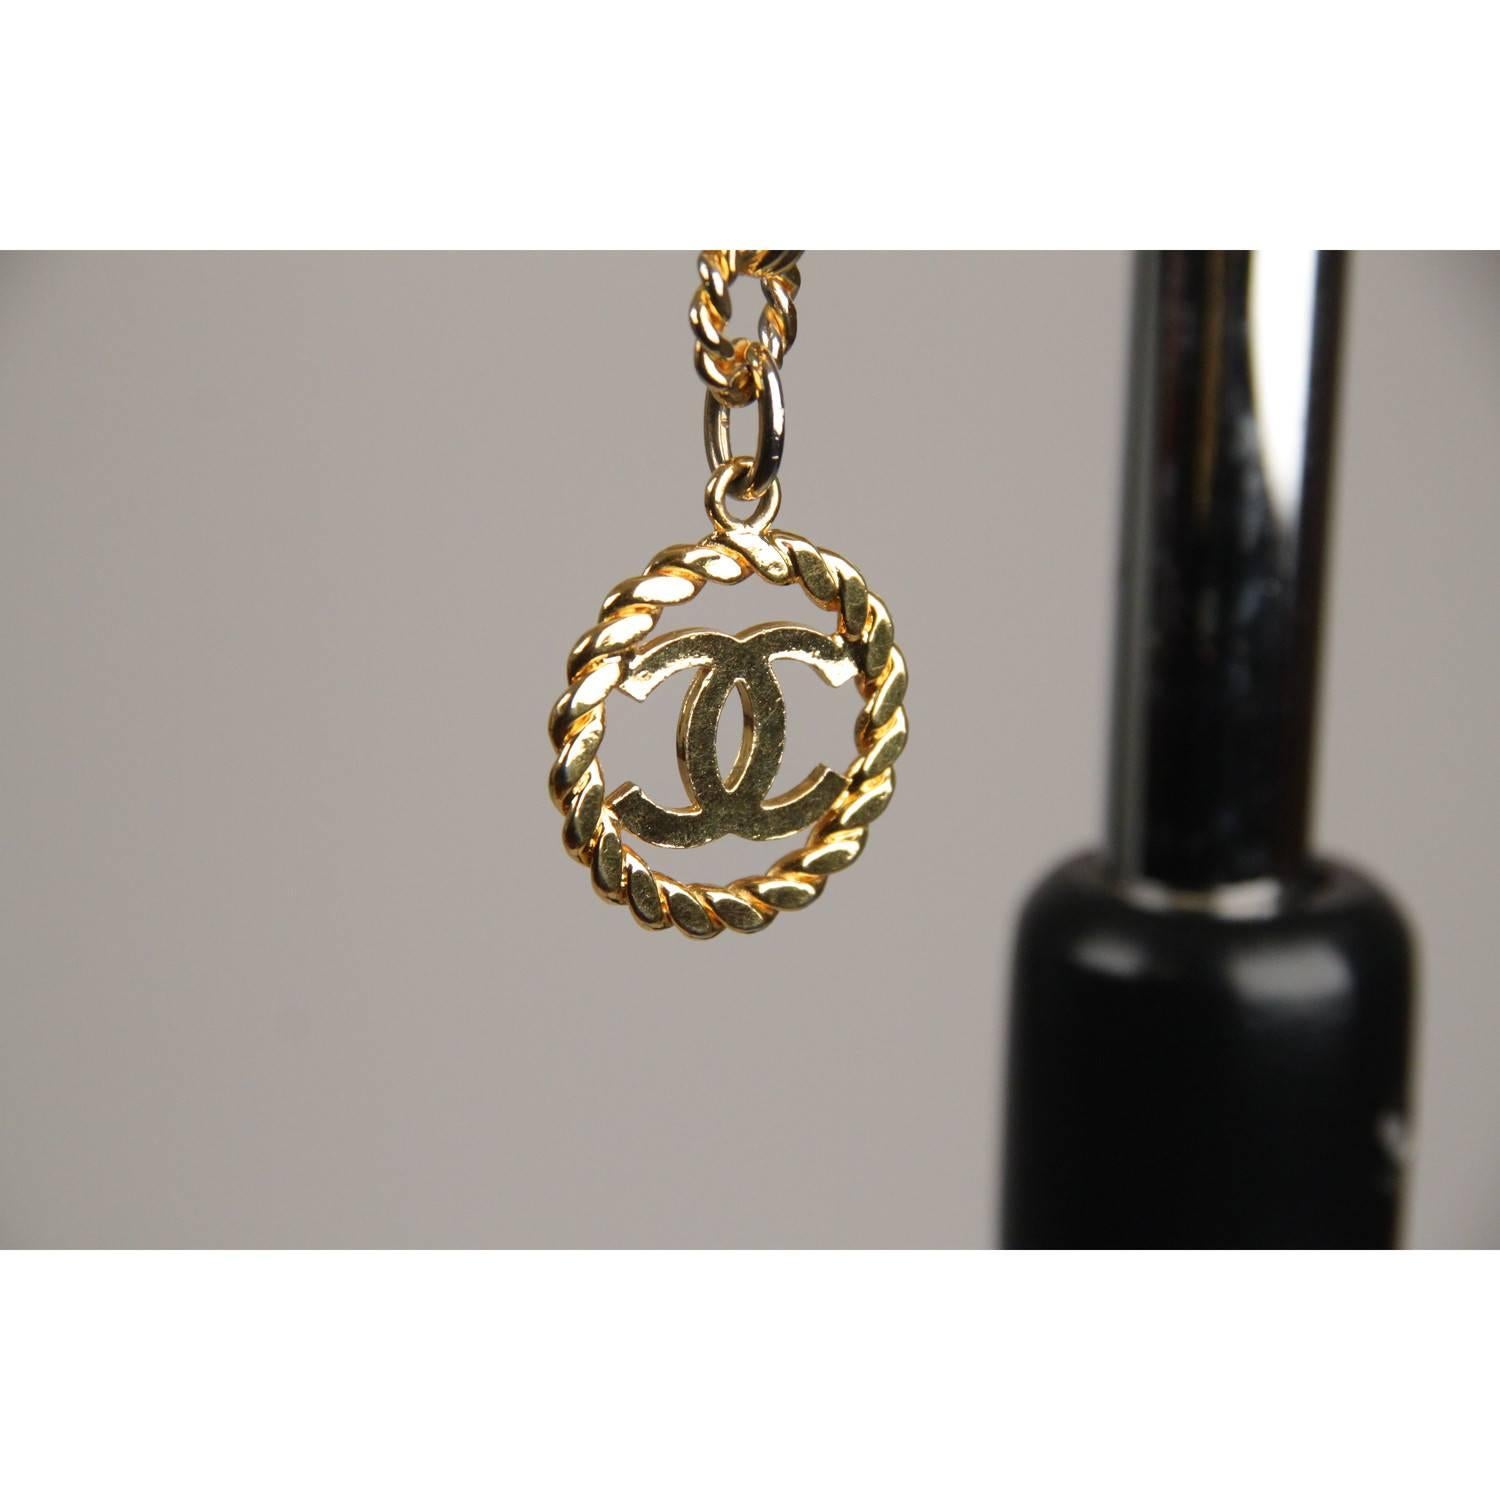 - Classic vintage Chanel triple row chain necklace/belt 
- Period/Era: late 80s/early 90s
- It is very versatile and will complete every look (you can use it as a necklace or as a belt)
- Gold metal
- Features 'CC CHANEL' pendant
- Hook chain